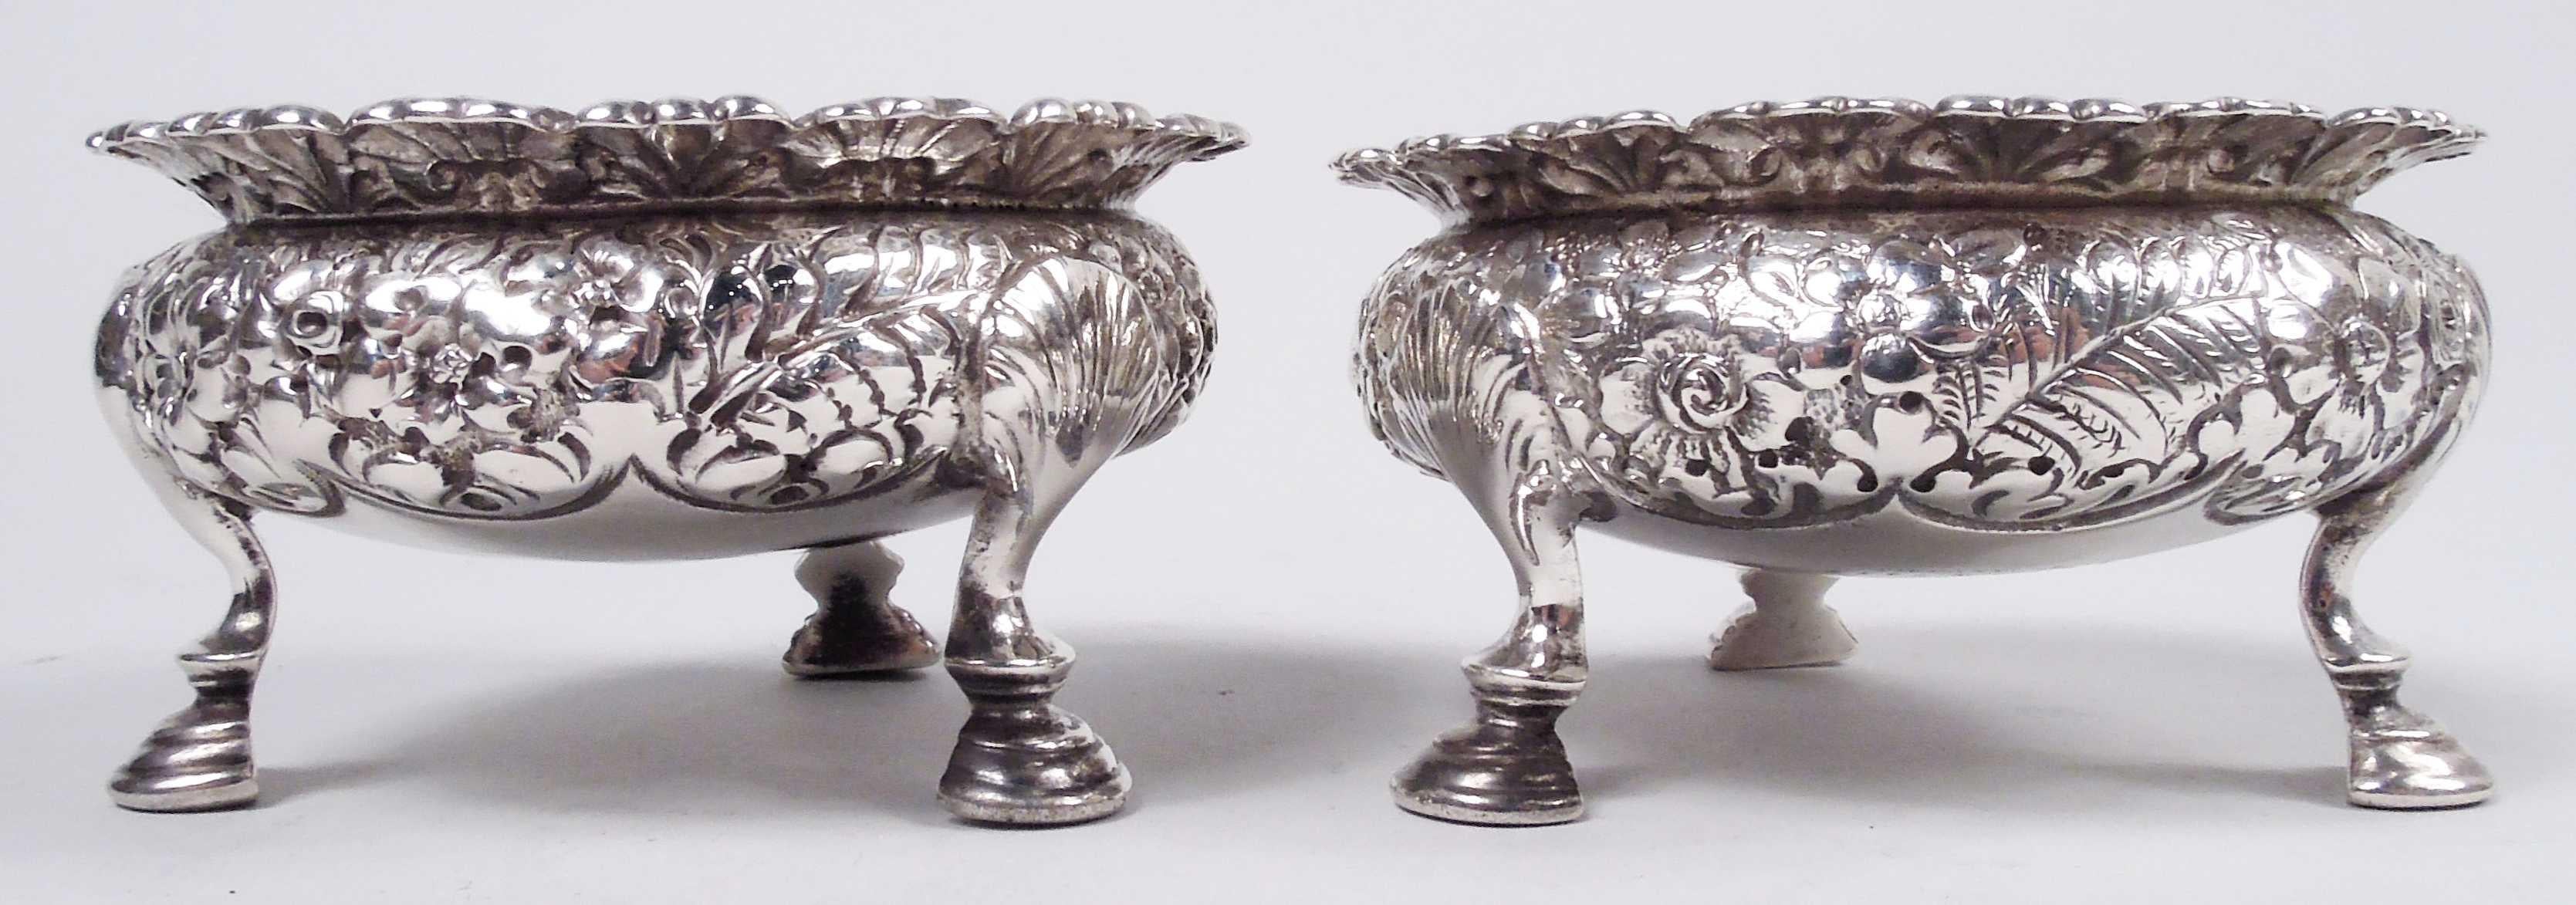 Pair of Victorian Classical sterling silver open salts. Made by Tiffany & Co. in New York. Each: Bellied bowl on 3 shell-mounted hoof supports. Repousse flowers and fronds. Everted rim with repousse scallop shells. Interlaced script monogram